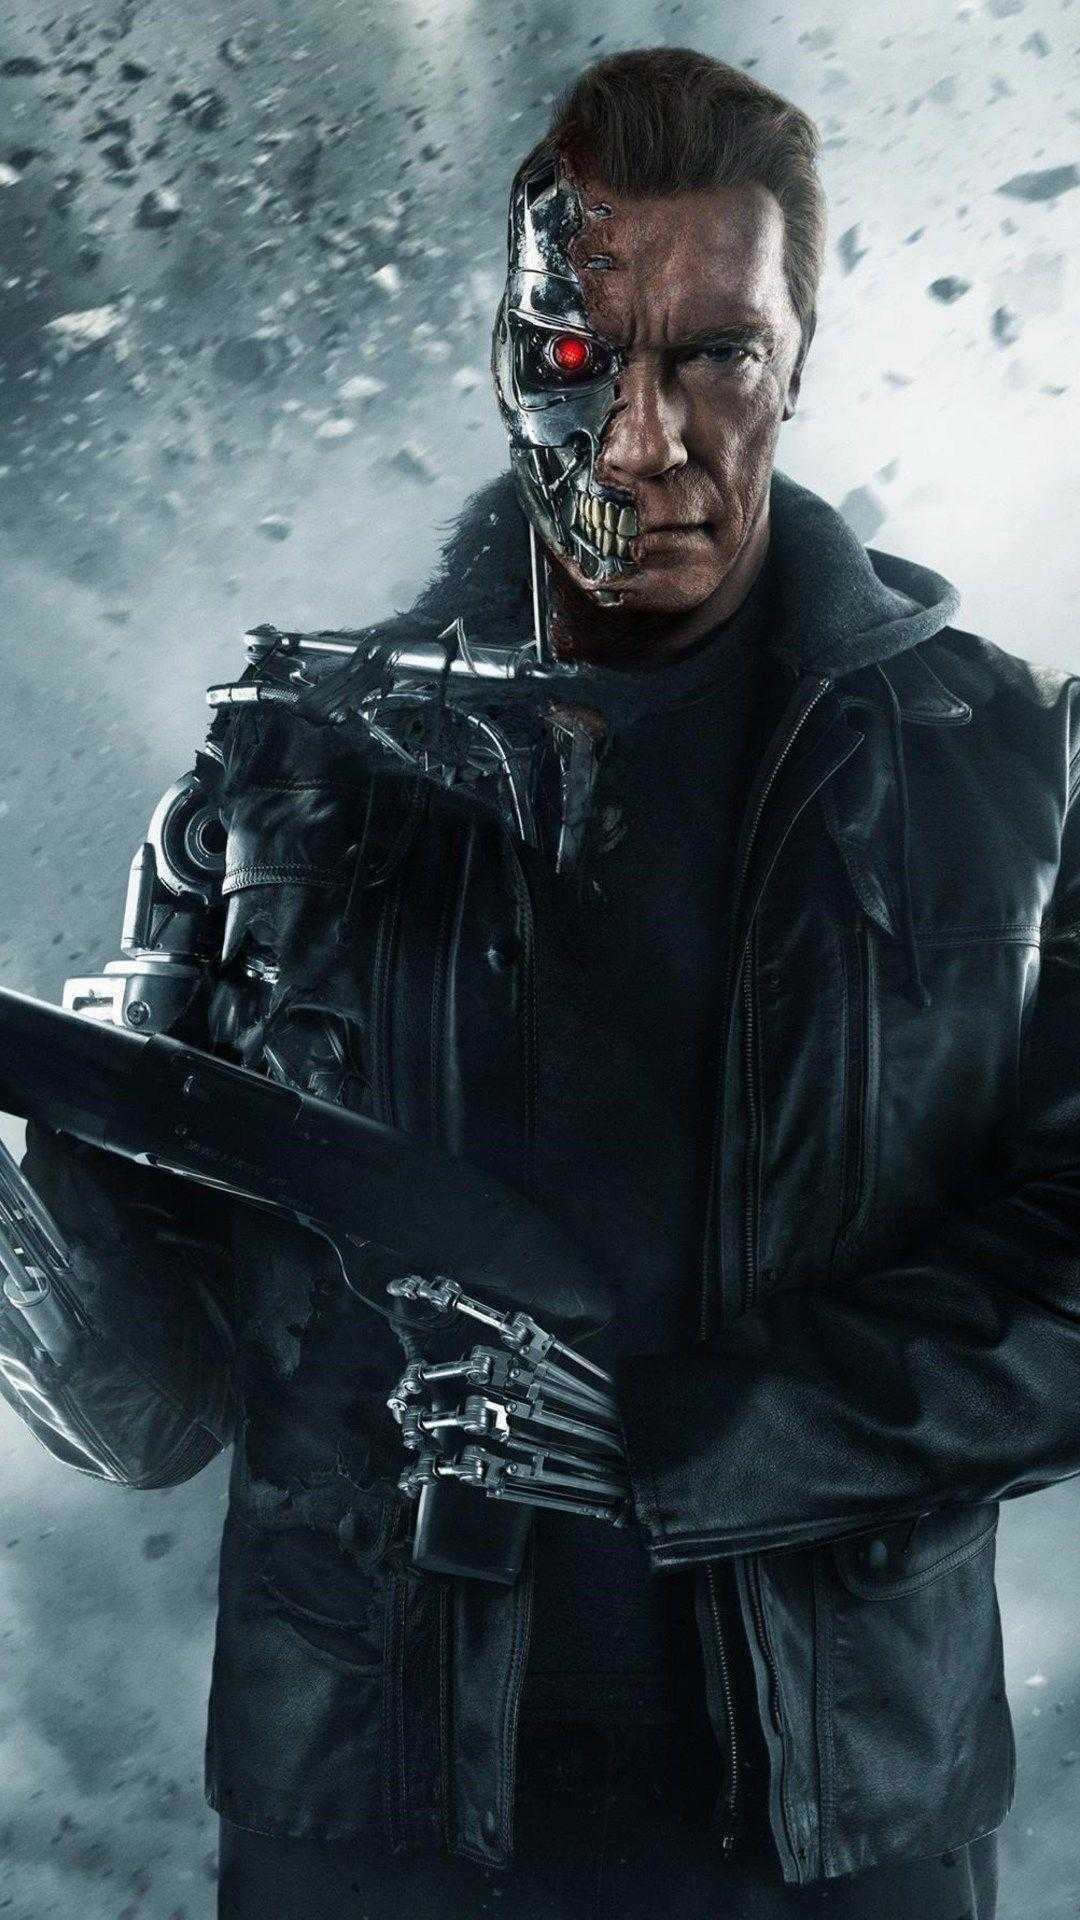 Terminator 4K wallpaper, High-resolution images, Futuristic sci-fi, Action-packed franchise, 1080x1920 Full HD Phone